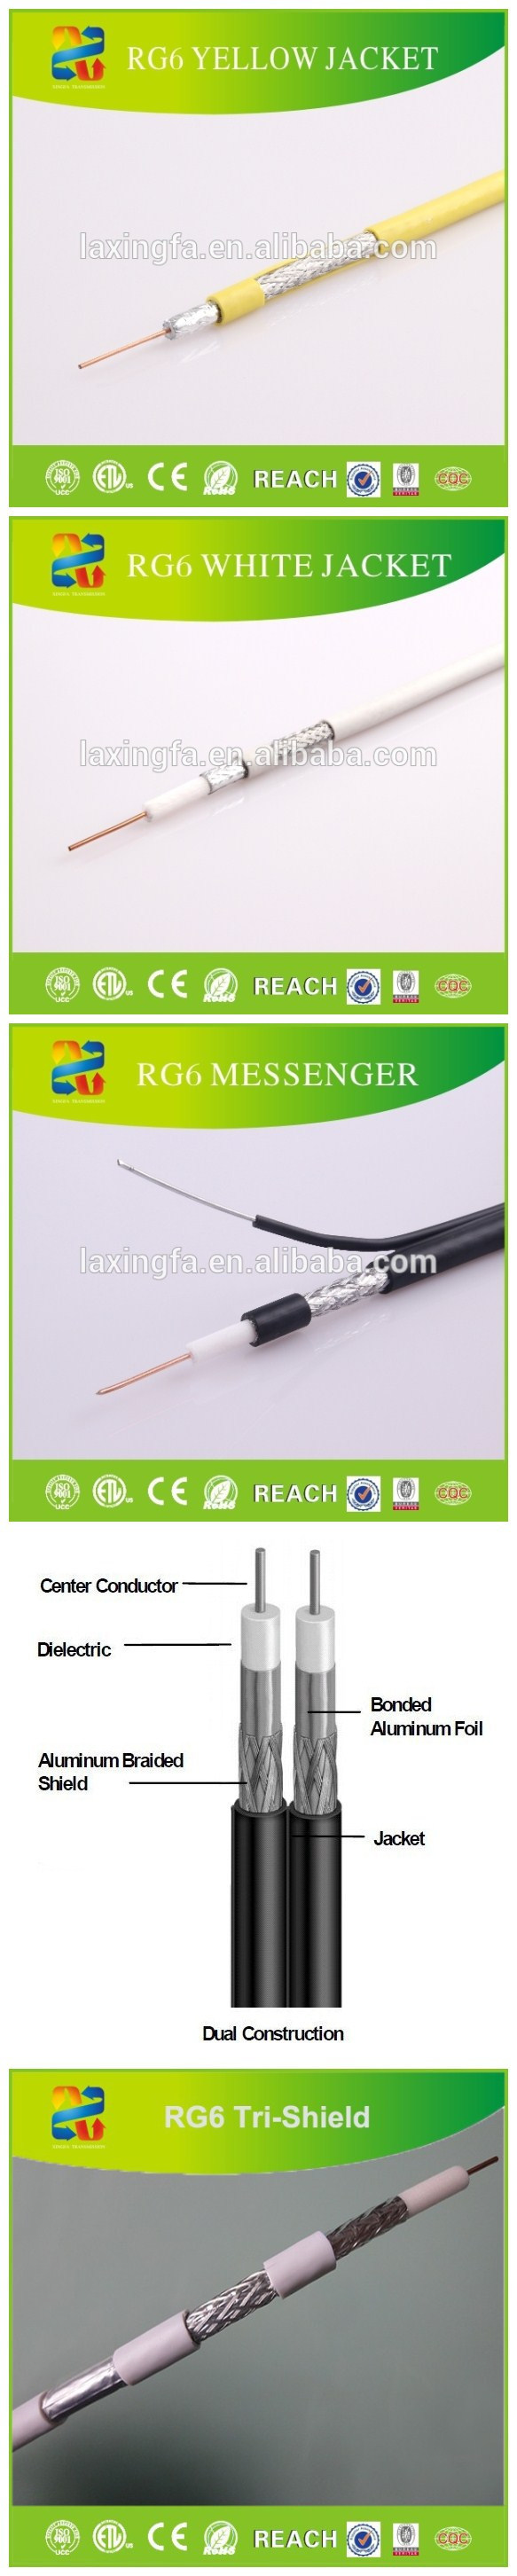 Linan Factory Price RG6 Cable Coaxial with CE RoHS